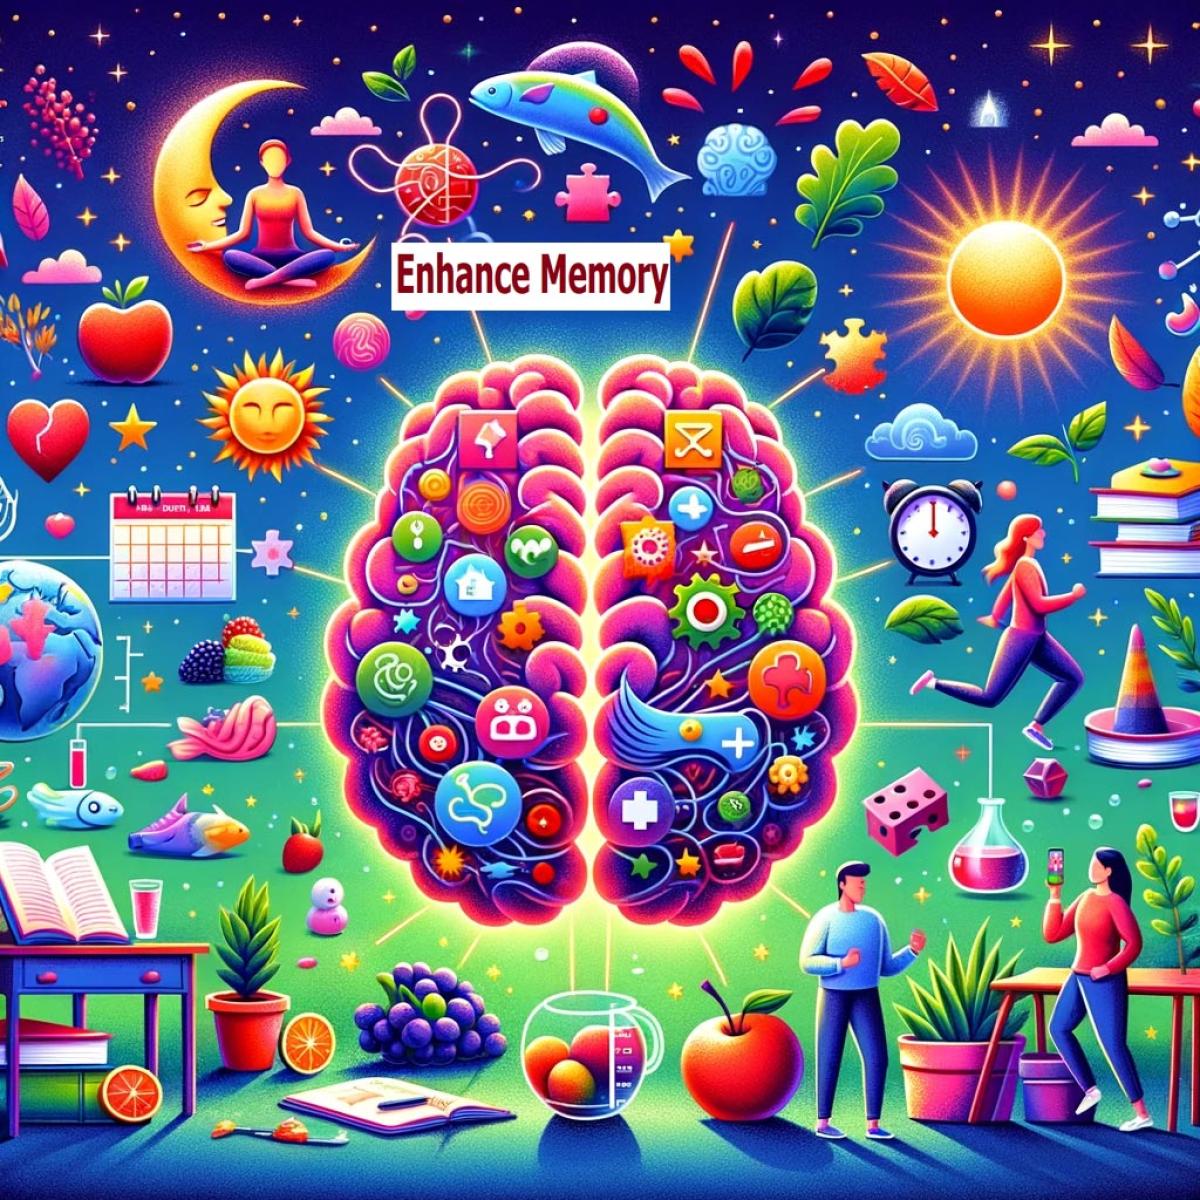 10 Easy Tips to Improve Your Memory Now